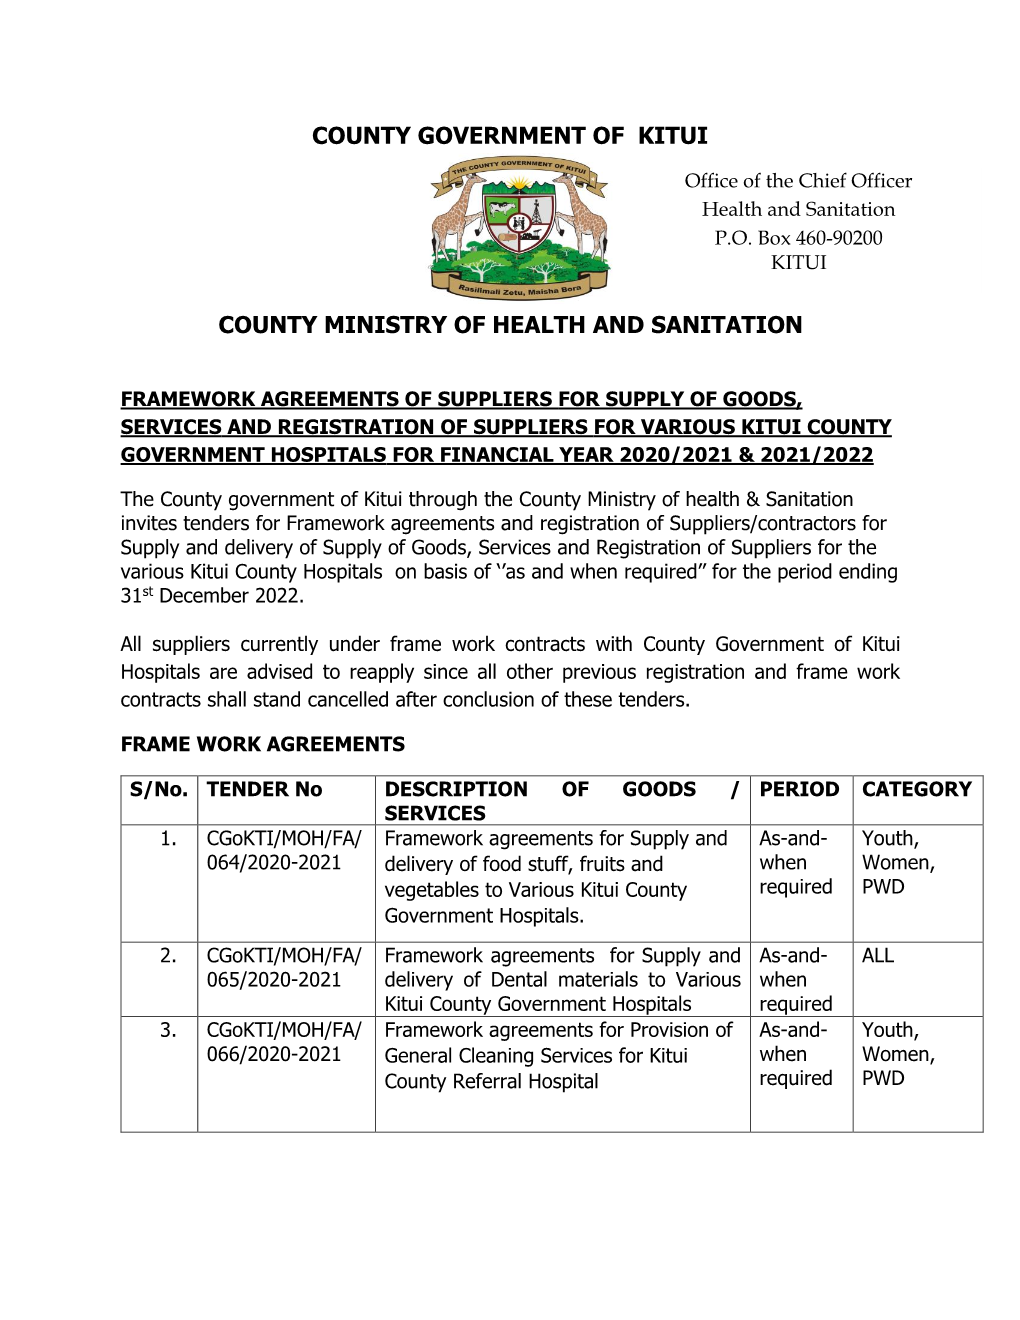 Office of the Chief Officer Health and Sanitation P.O